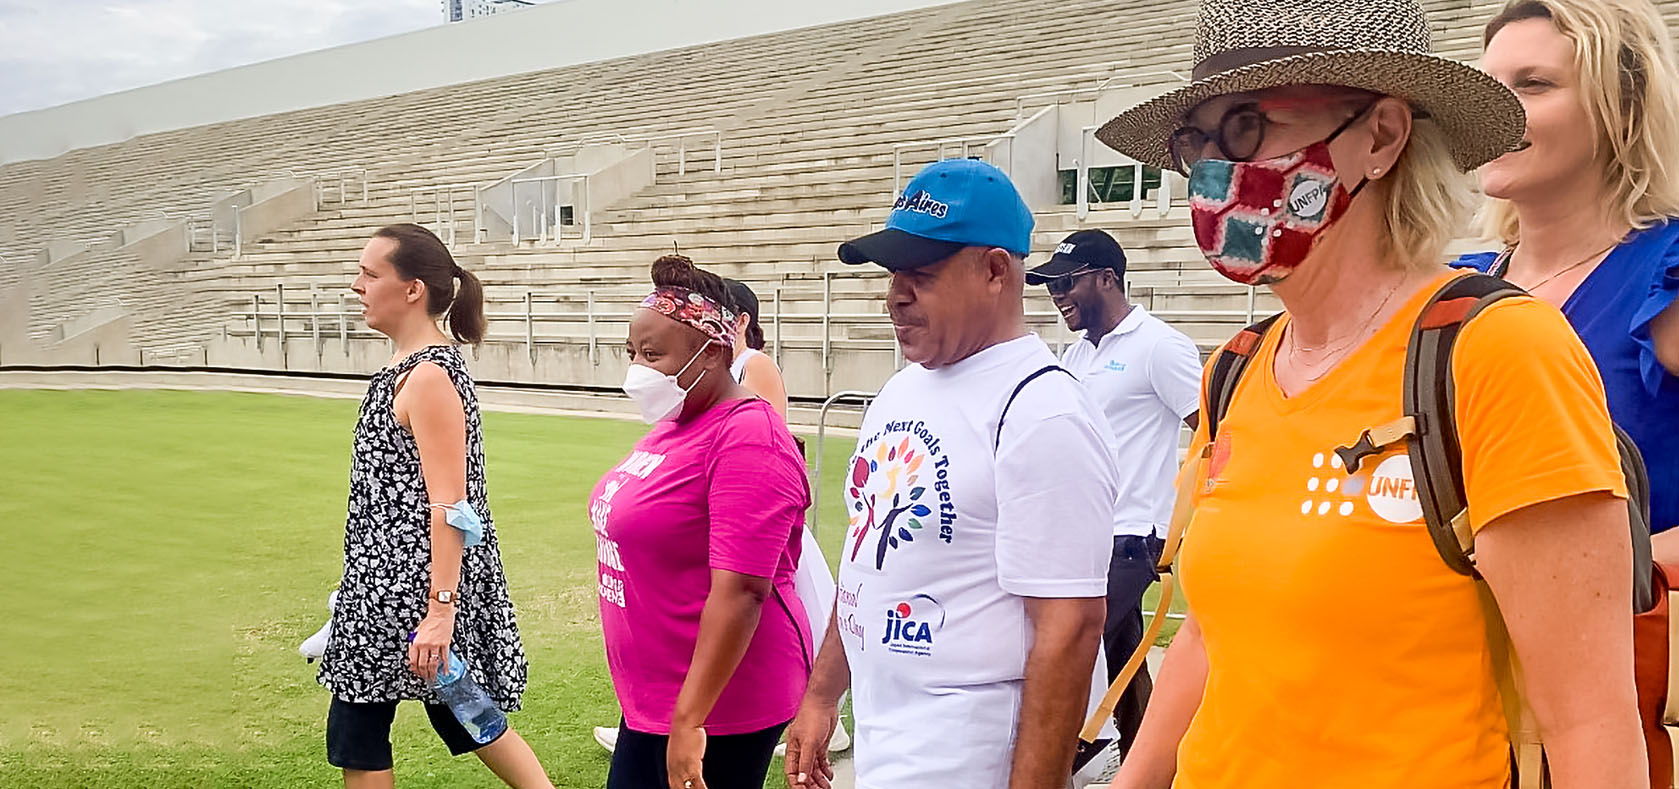 L-R Caroline Nyameyemombe, UN Women Deputy Country Representative, Governor Powes Parkop and Marielle Sander, UNFPA Country Representative lead the march to kickstart the International Women’s Day 2022 celebrations in Papua Neew Guinea on March 6, 2022. Photo: UN Women/Aidah Nanyonjo